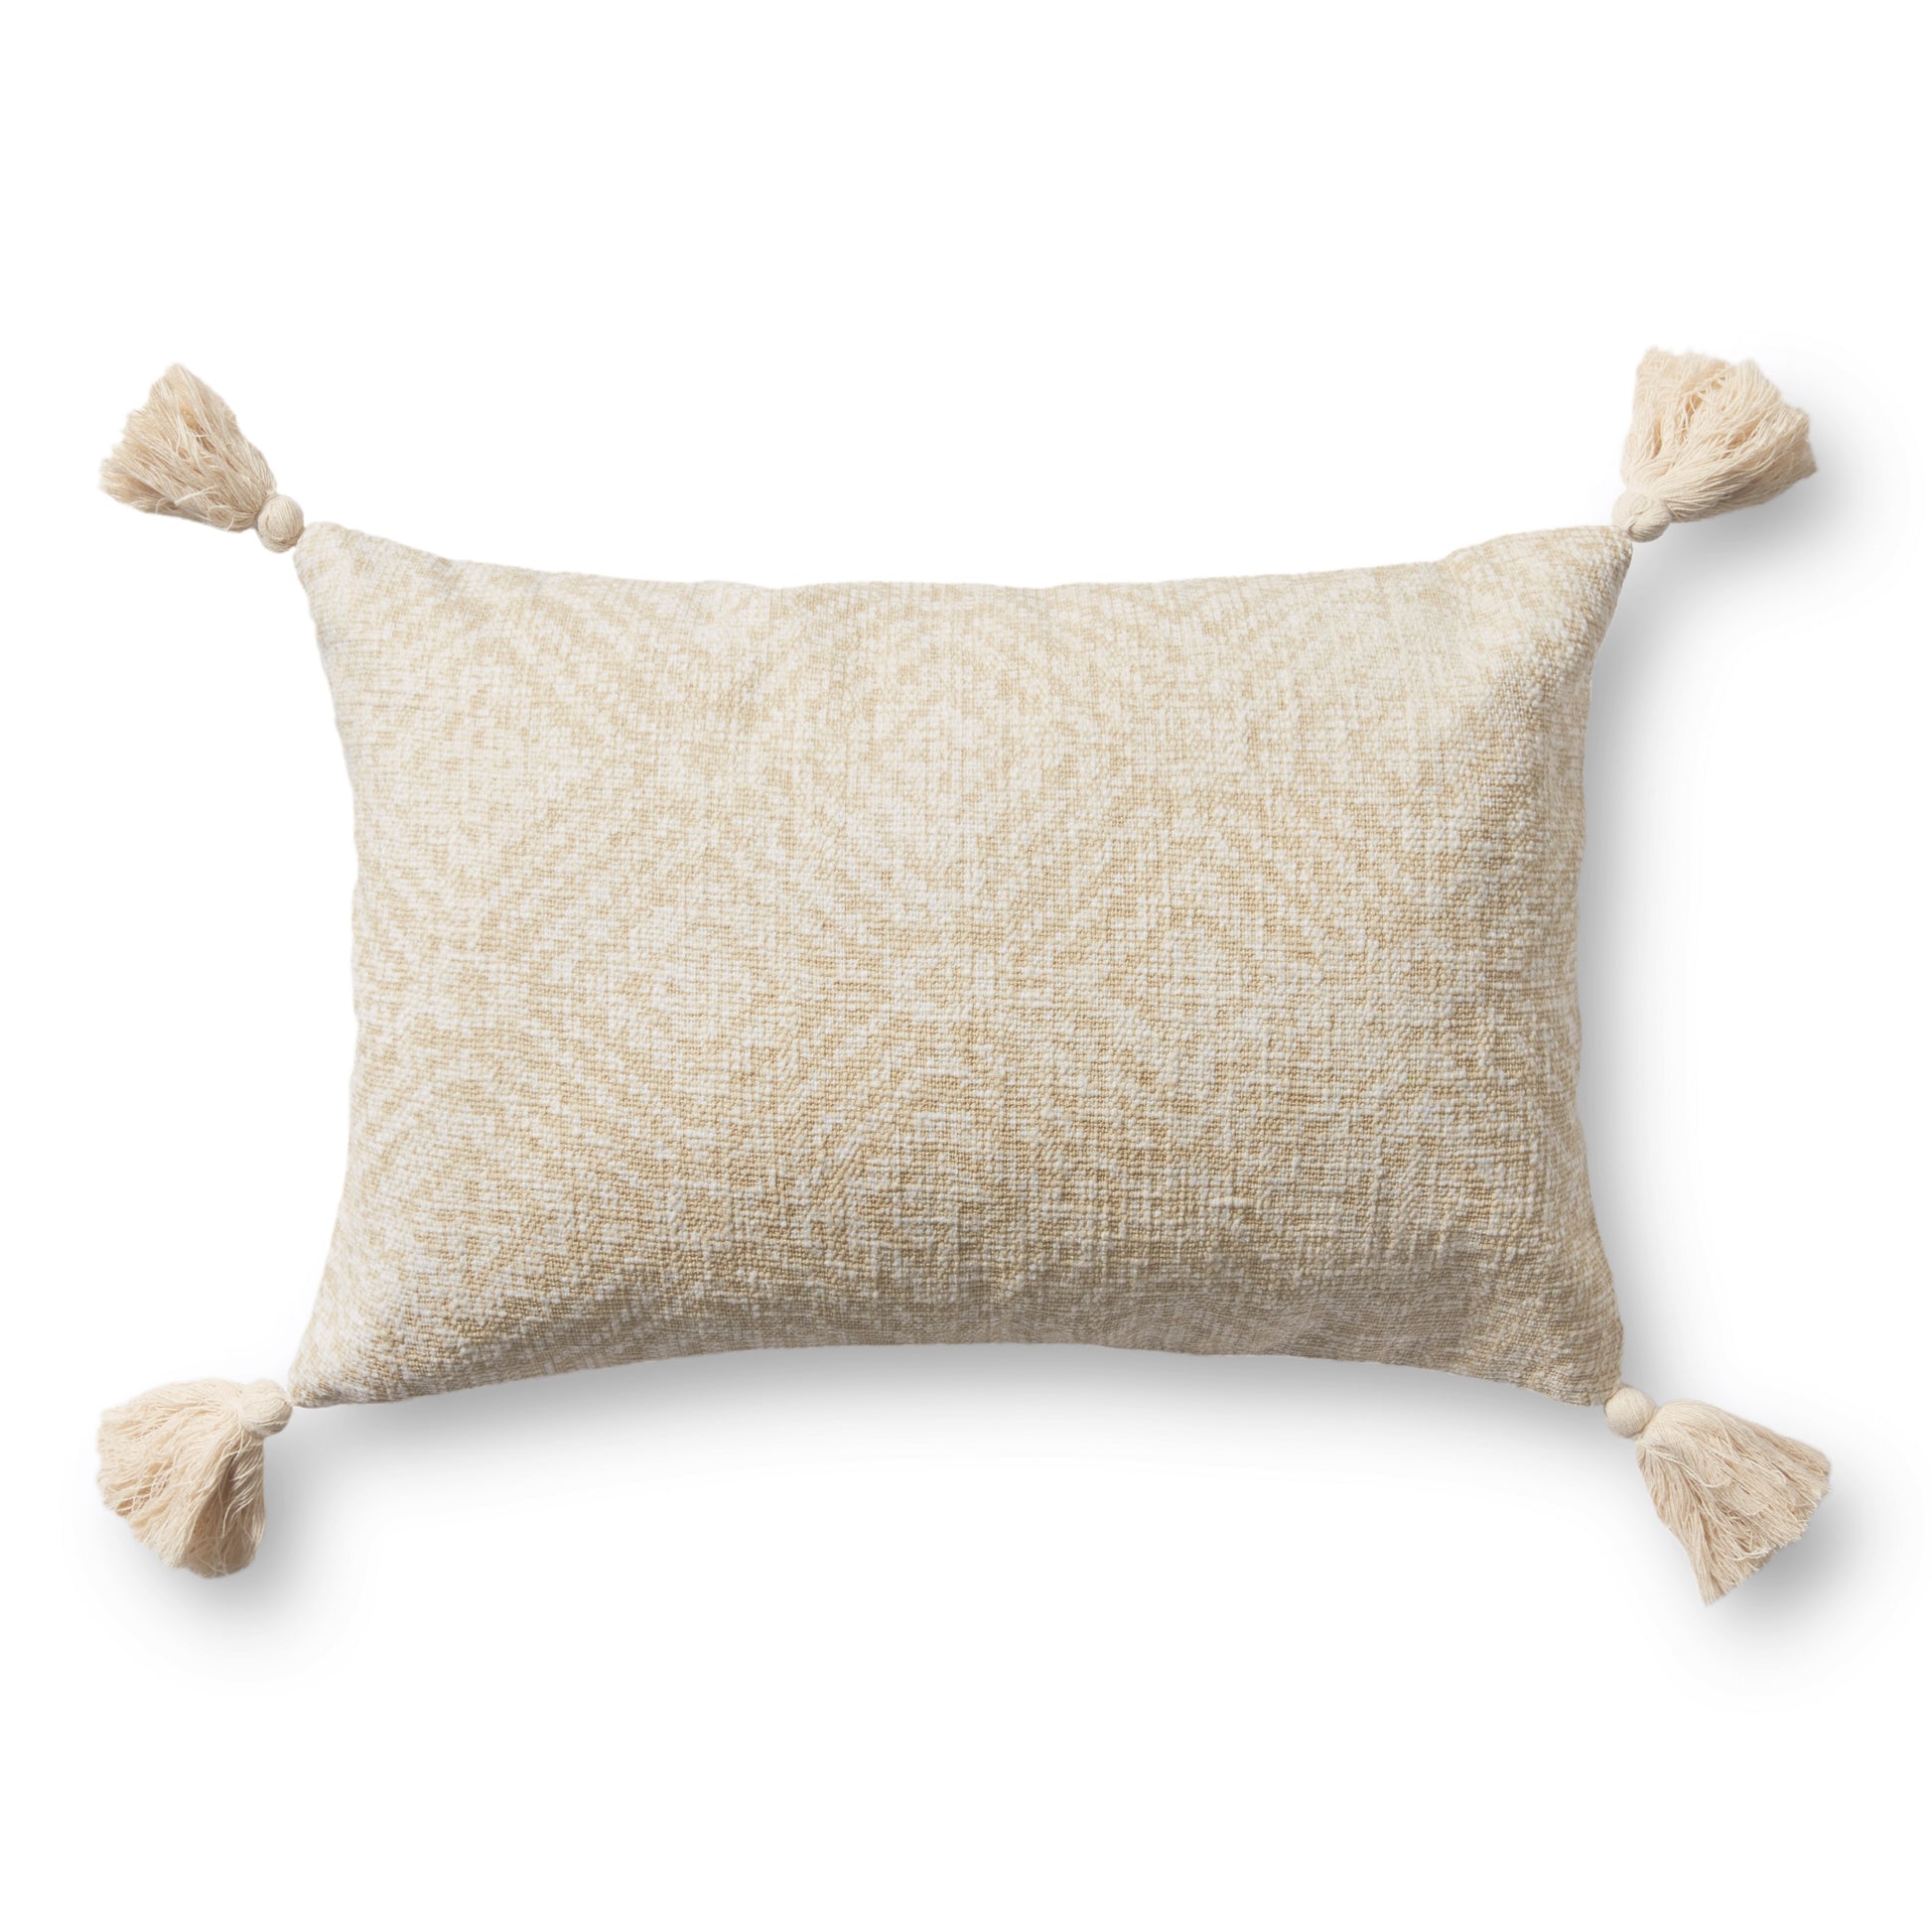 Photo of a pillow;  P0621 Ivory 13" x 21" Cover w/Poly Pillow